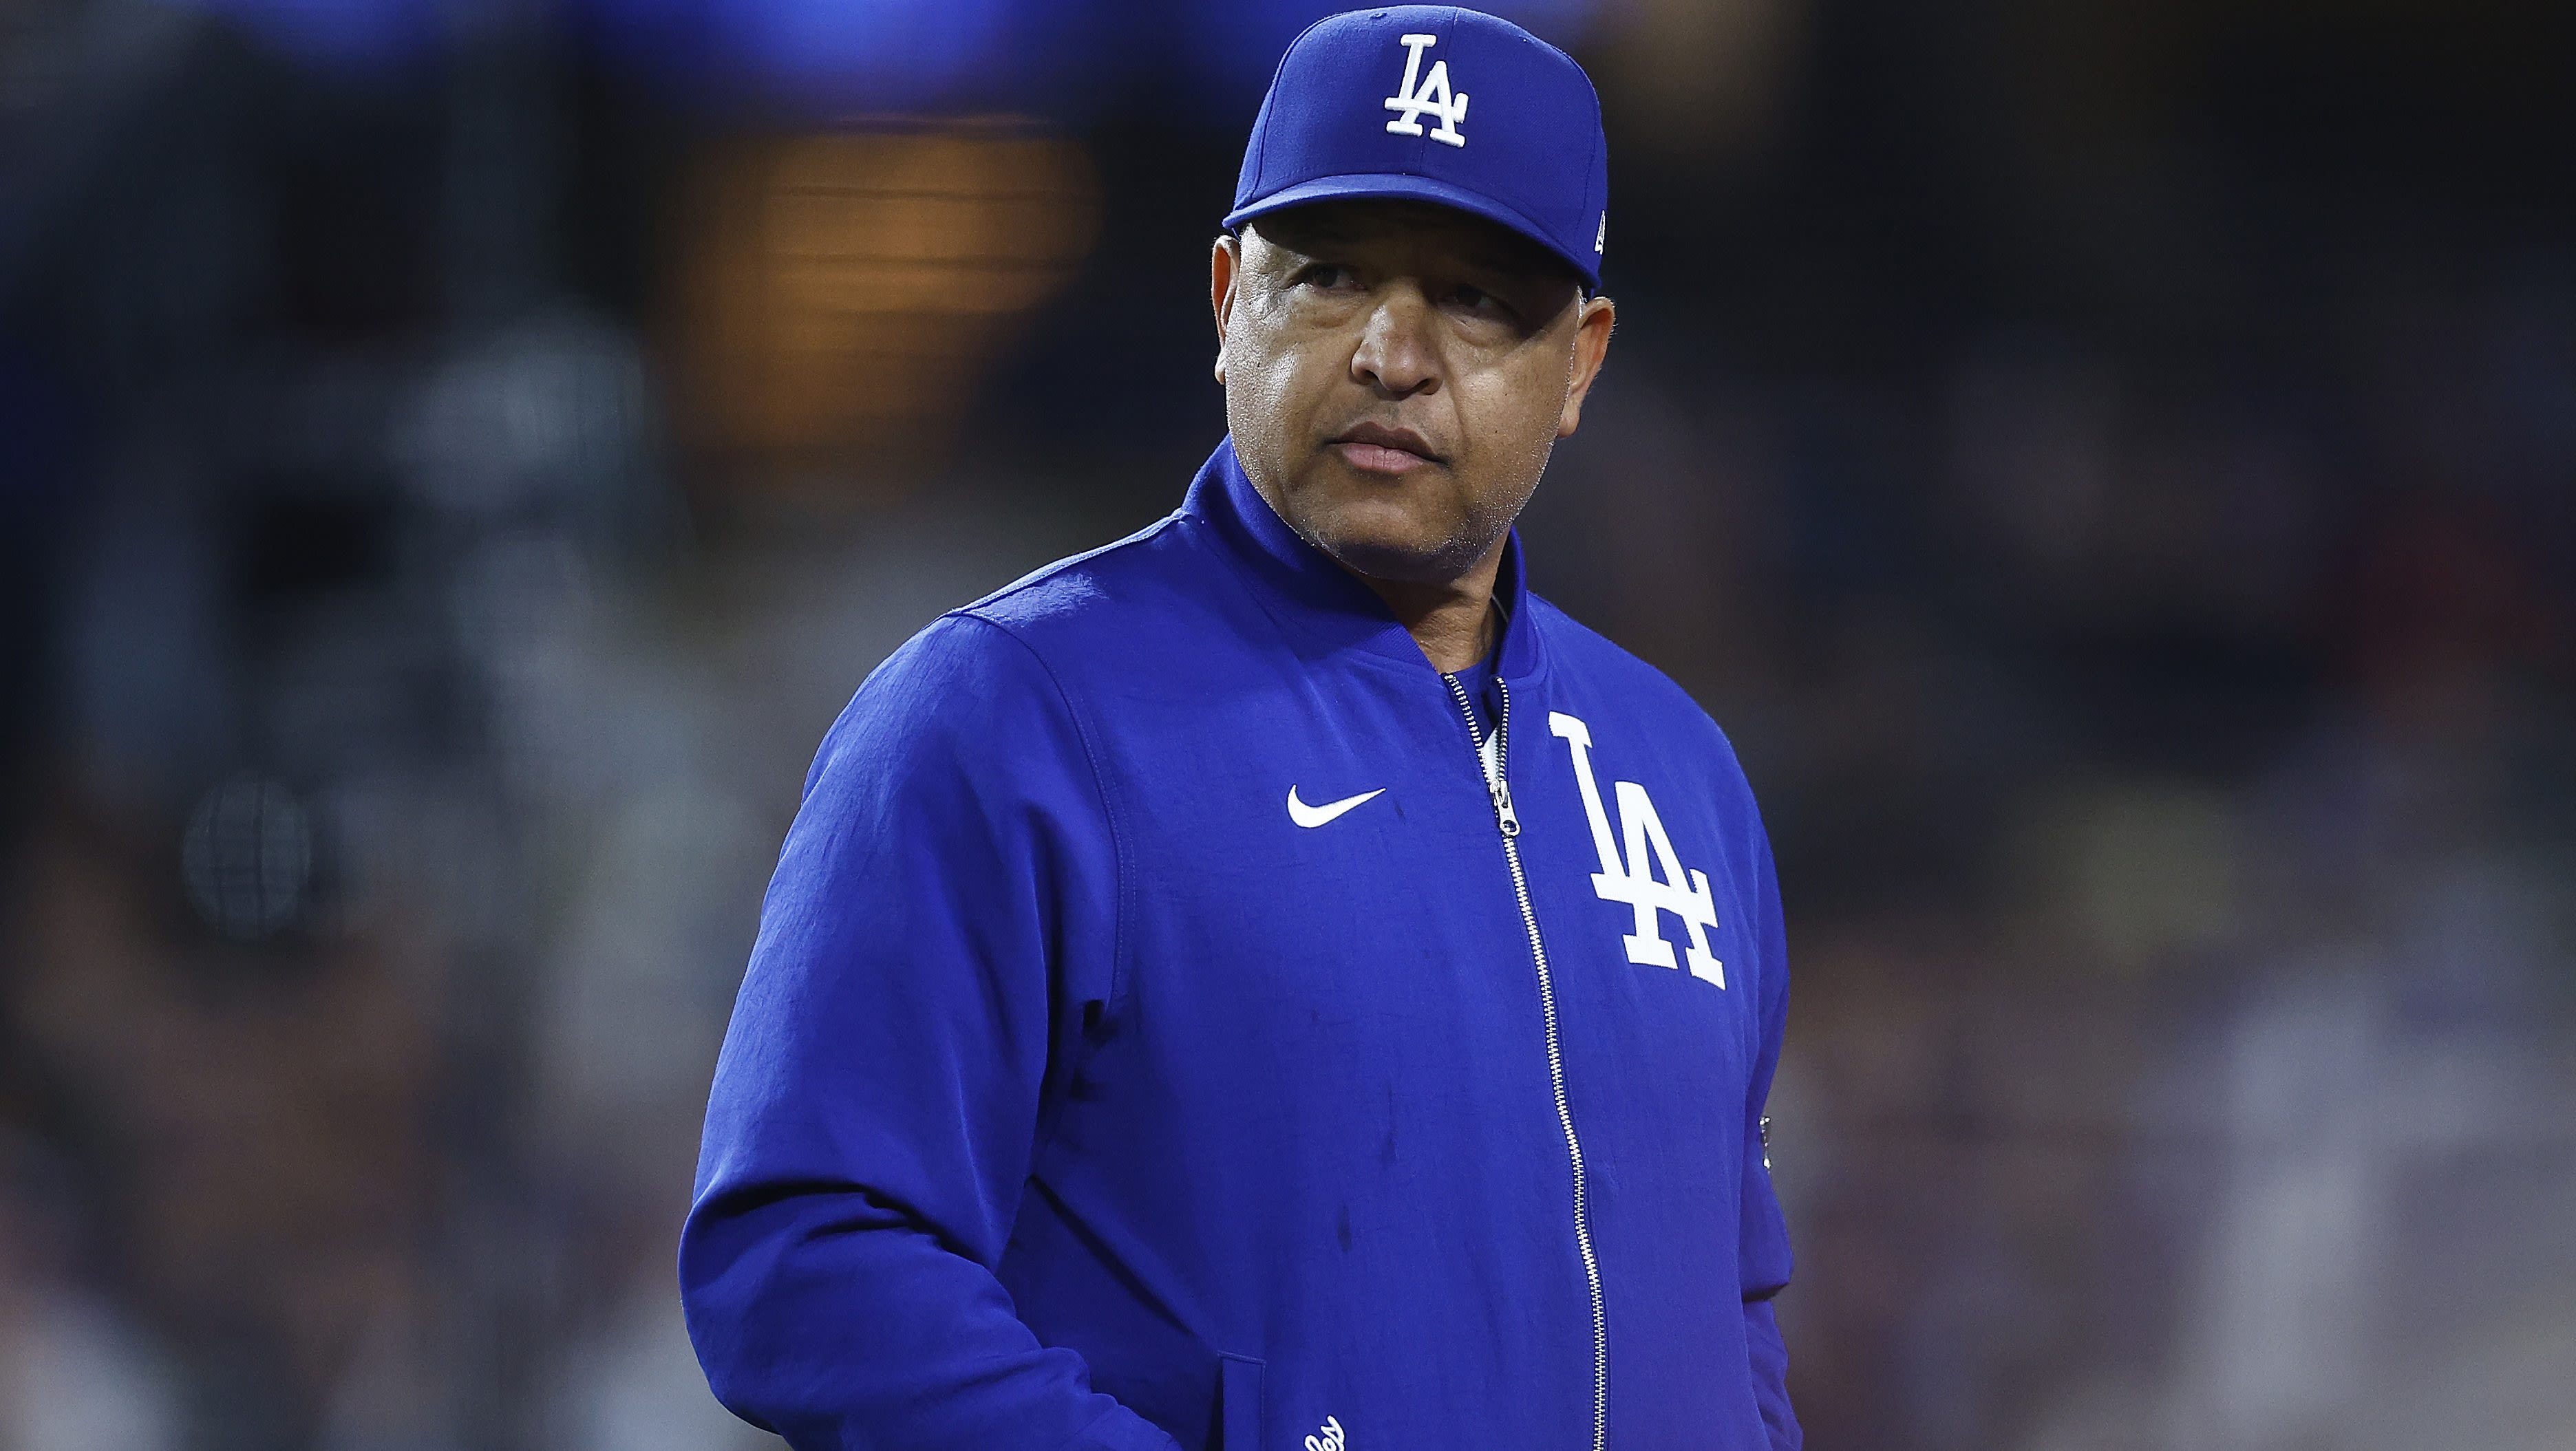 Dodgers Getting Pitching Help After the All-Star Break Amid Bad Injury Updates